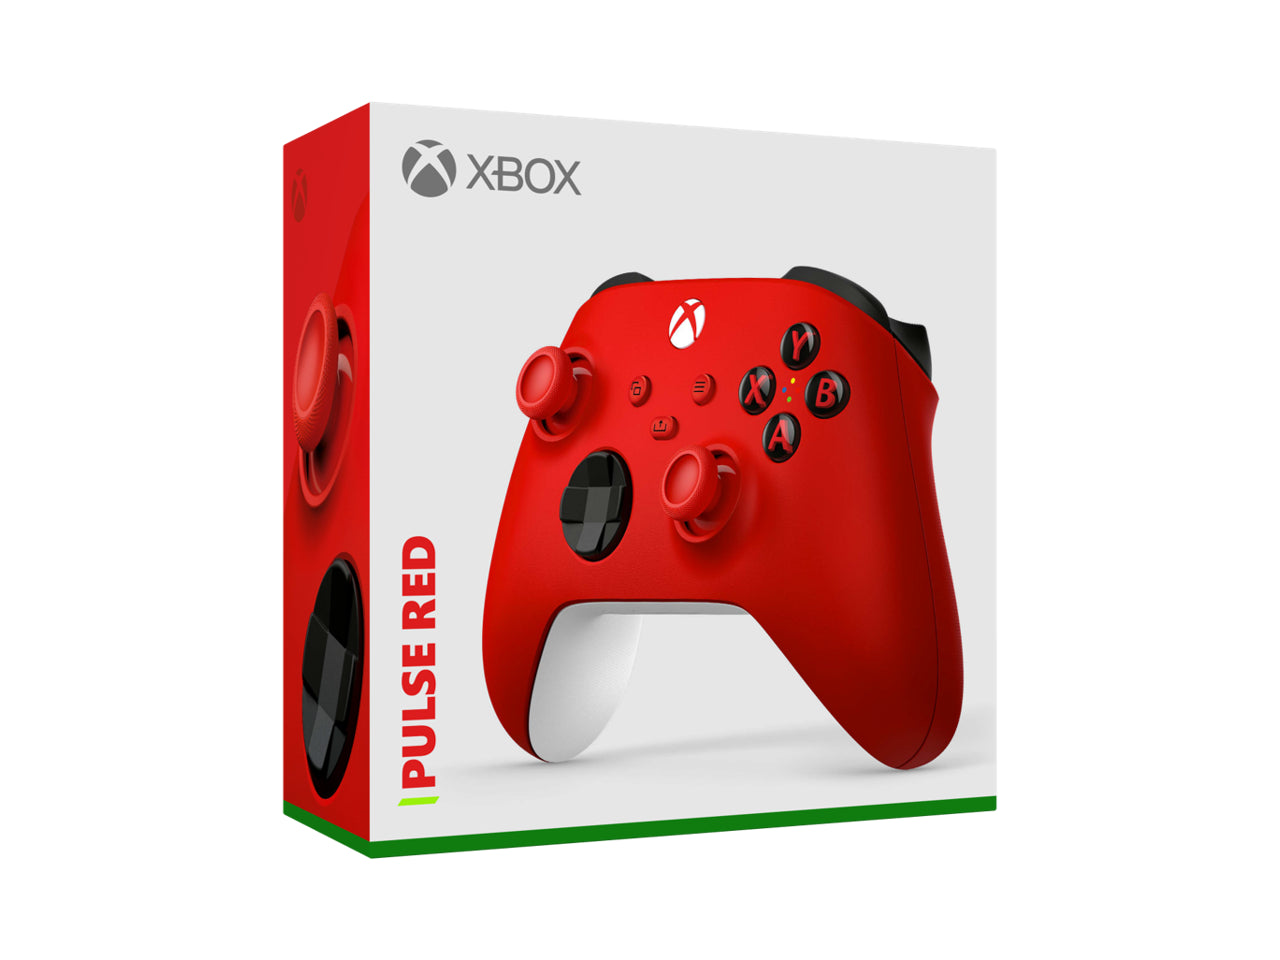 Wireless Controller - Pulse Red